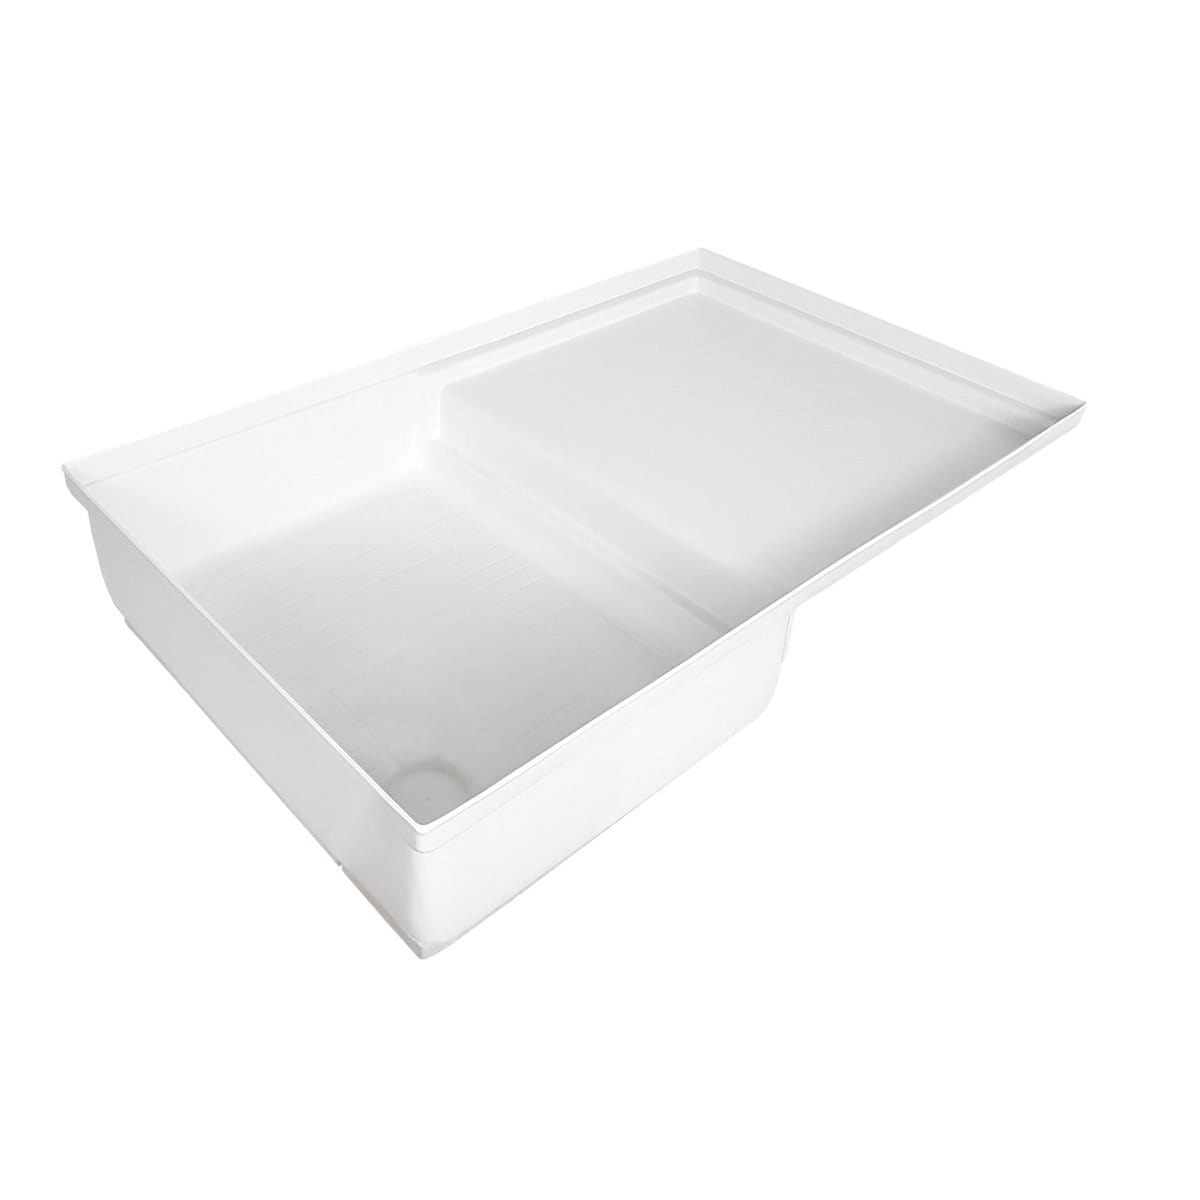 ICON Not Qualified for Free Shipping ICON Combo Shower Pan SP400 Polar White #12893